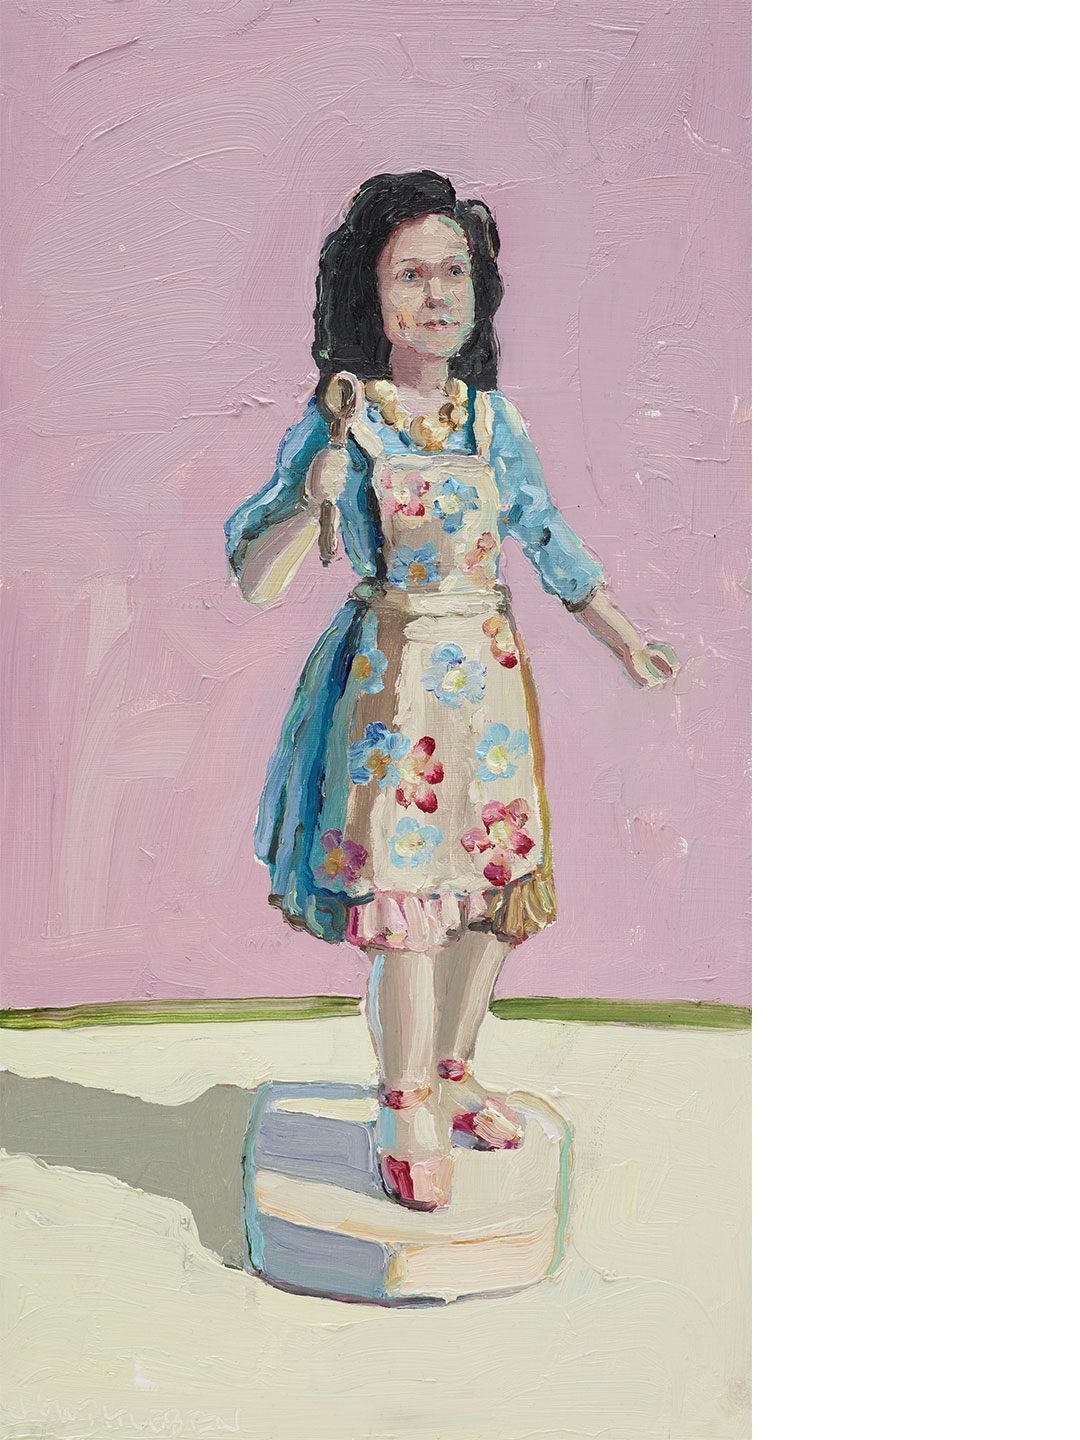 Artwork entered in the Archibald Prize 2020, Art Gallery of New South Wales